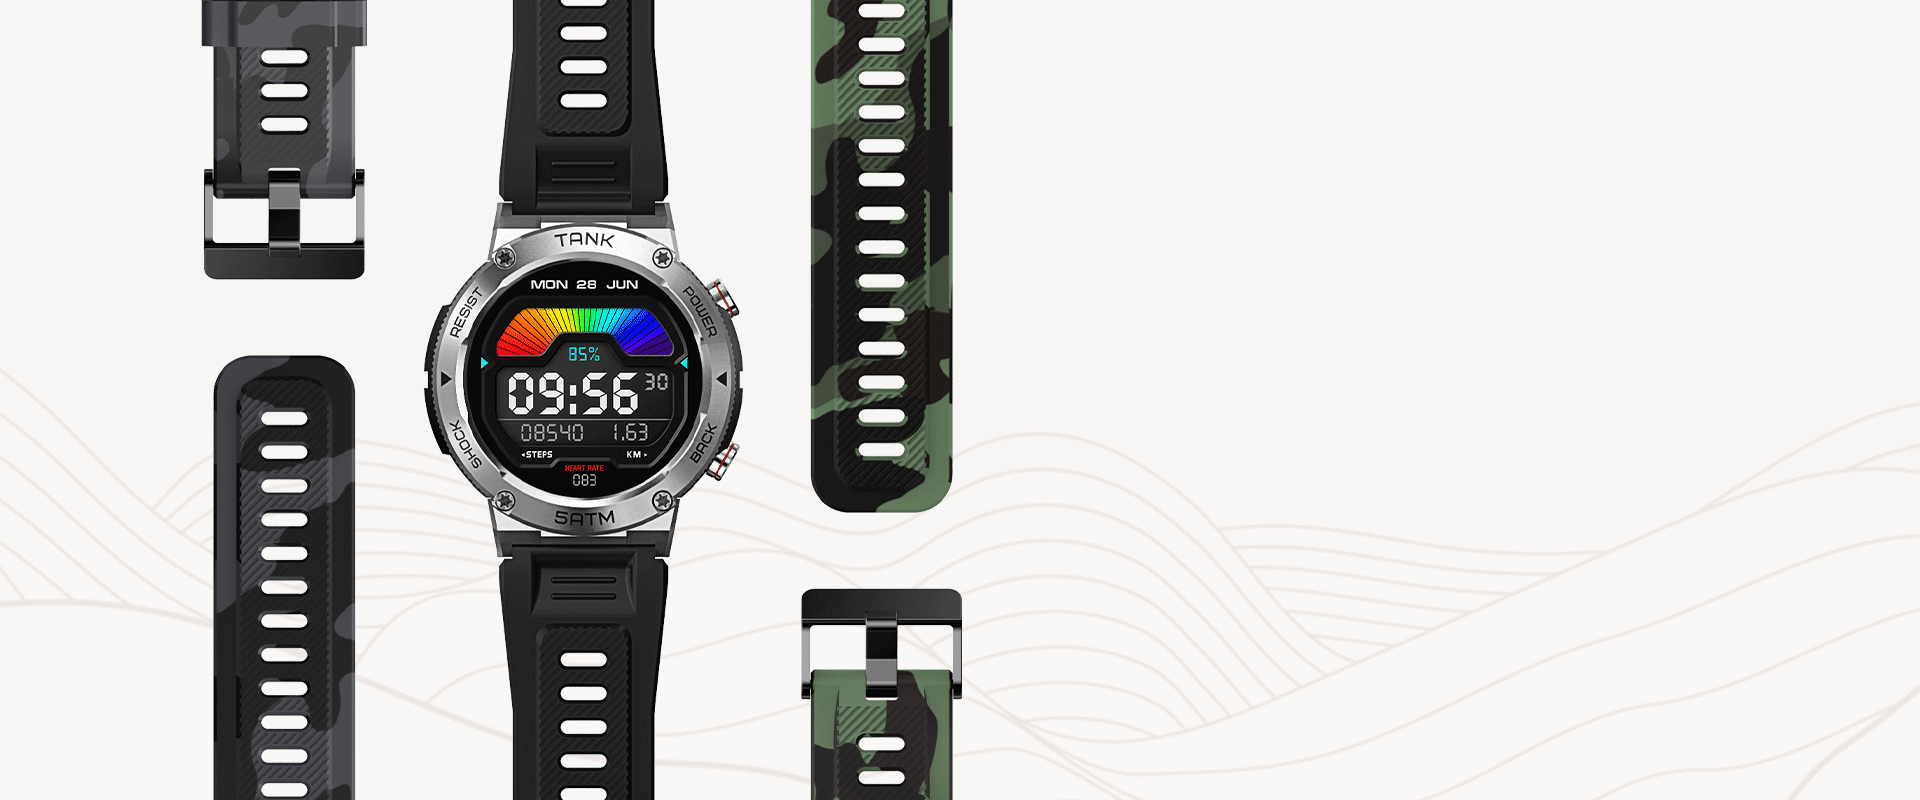 KOSPET TANK T1 Smartwatch Stunning Camouflage Straps Available